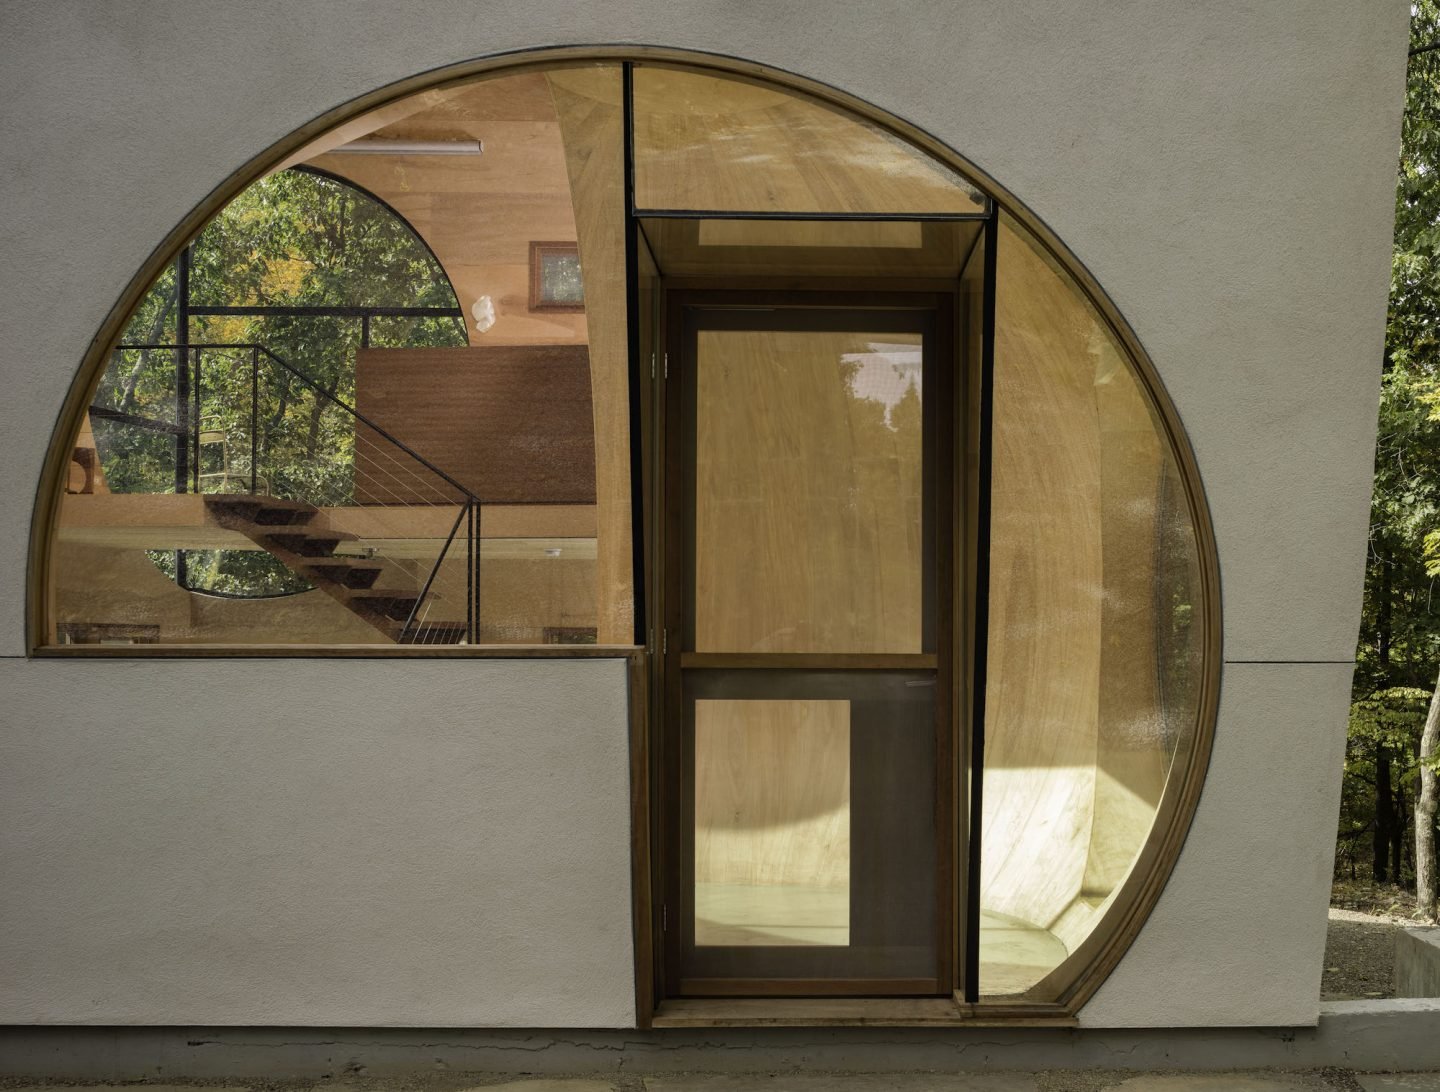 IGNANT-Architecture-Ex-of-In-House-Steven-Holl-Paul-Warchol-05